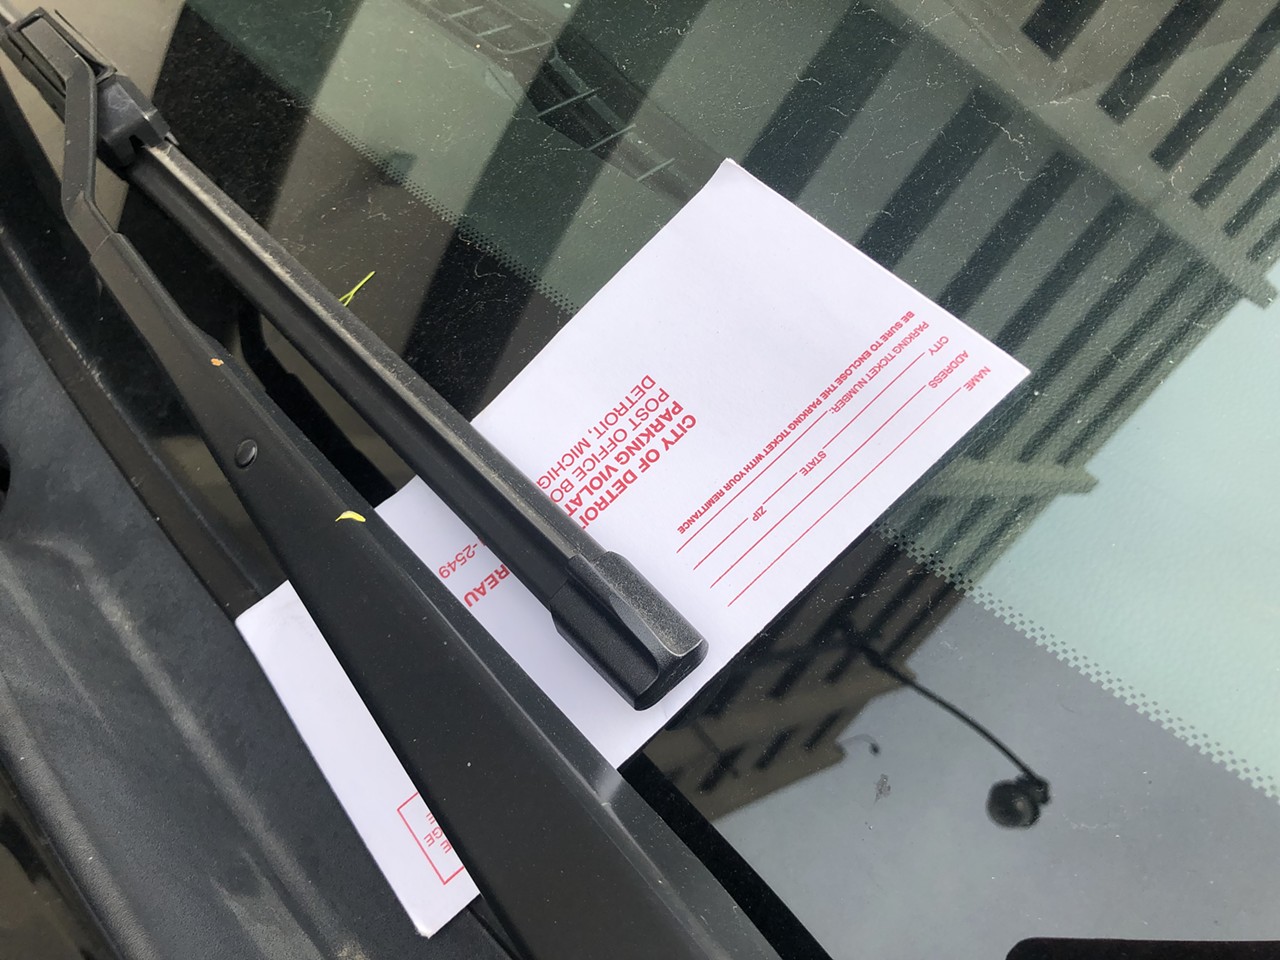 Getting a parking ticket. It will set you back $40.